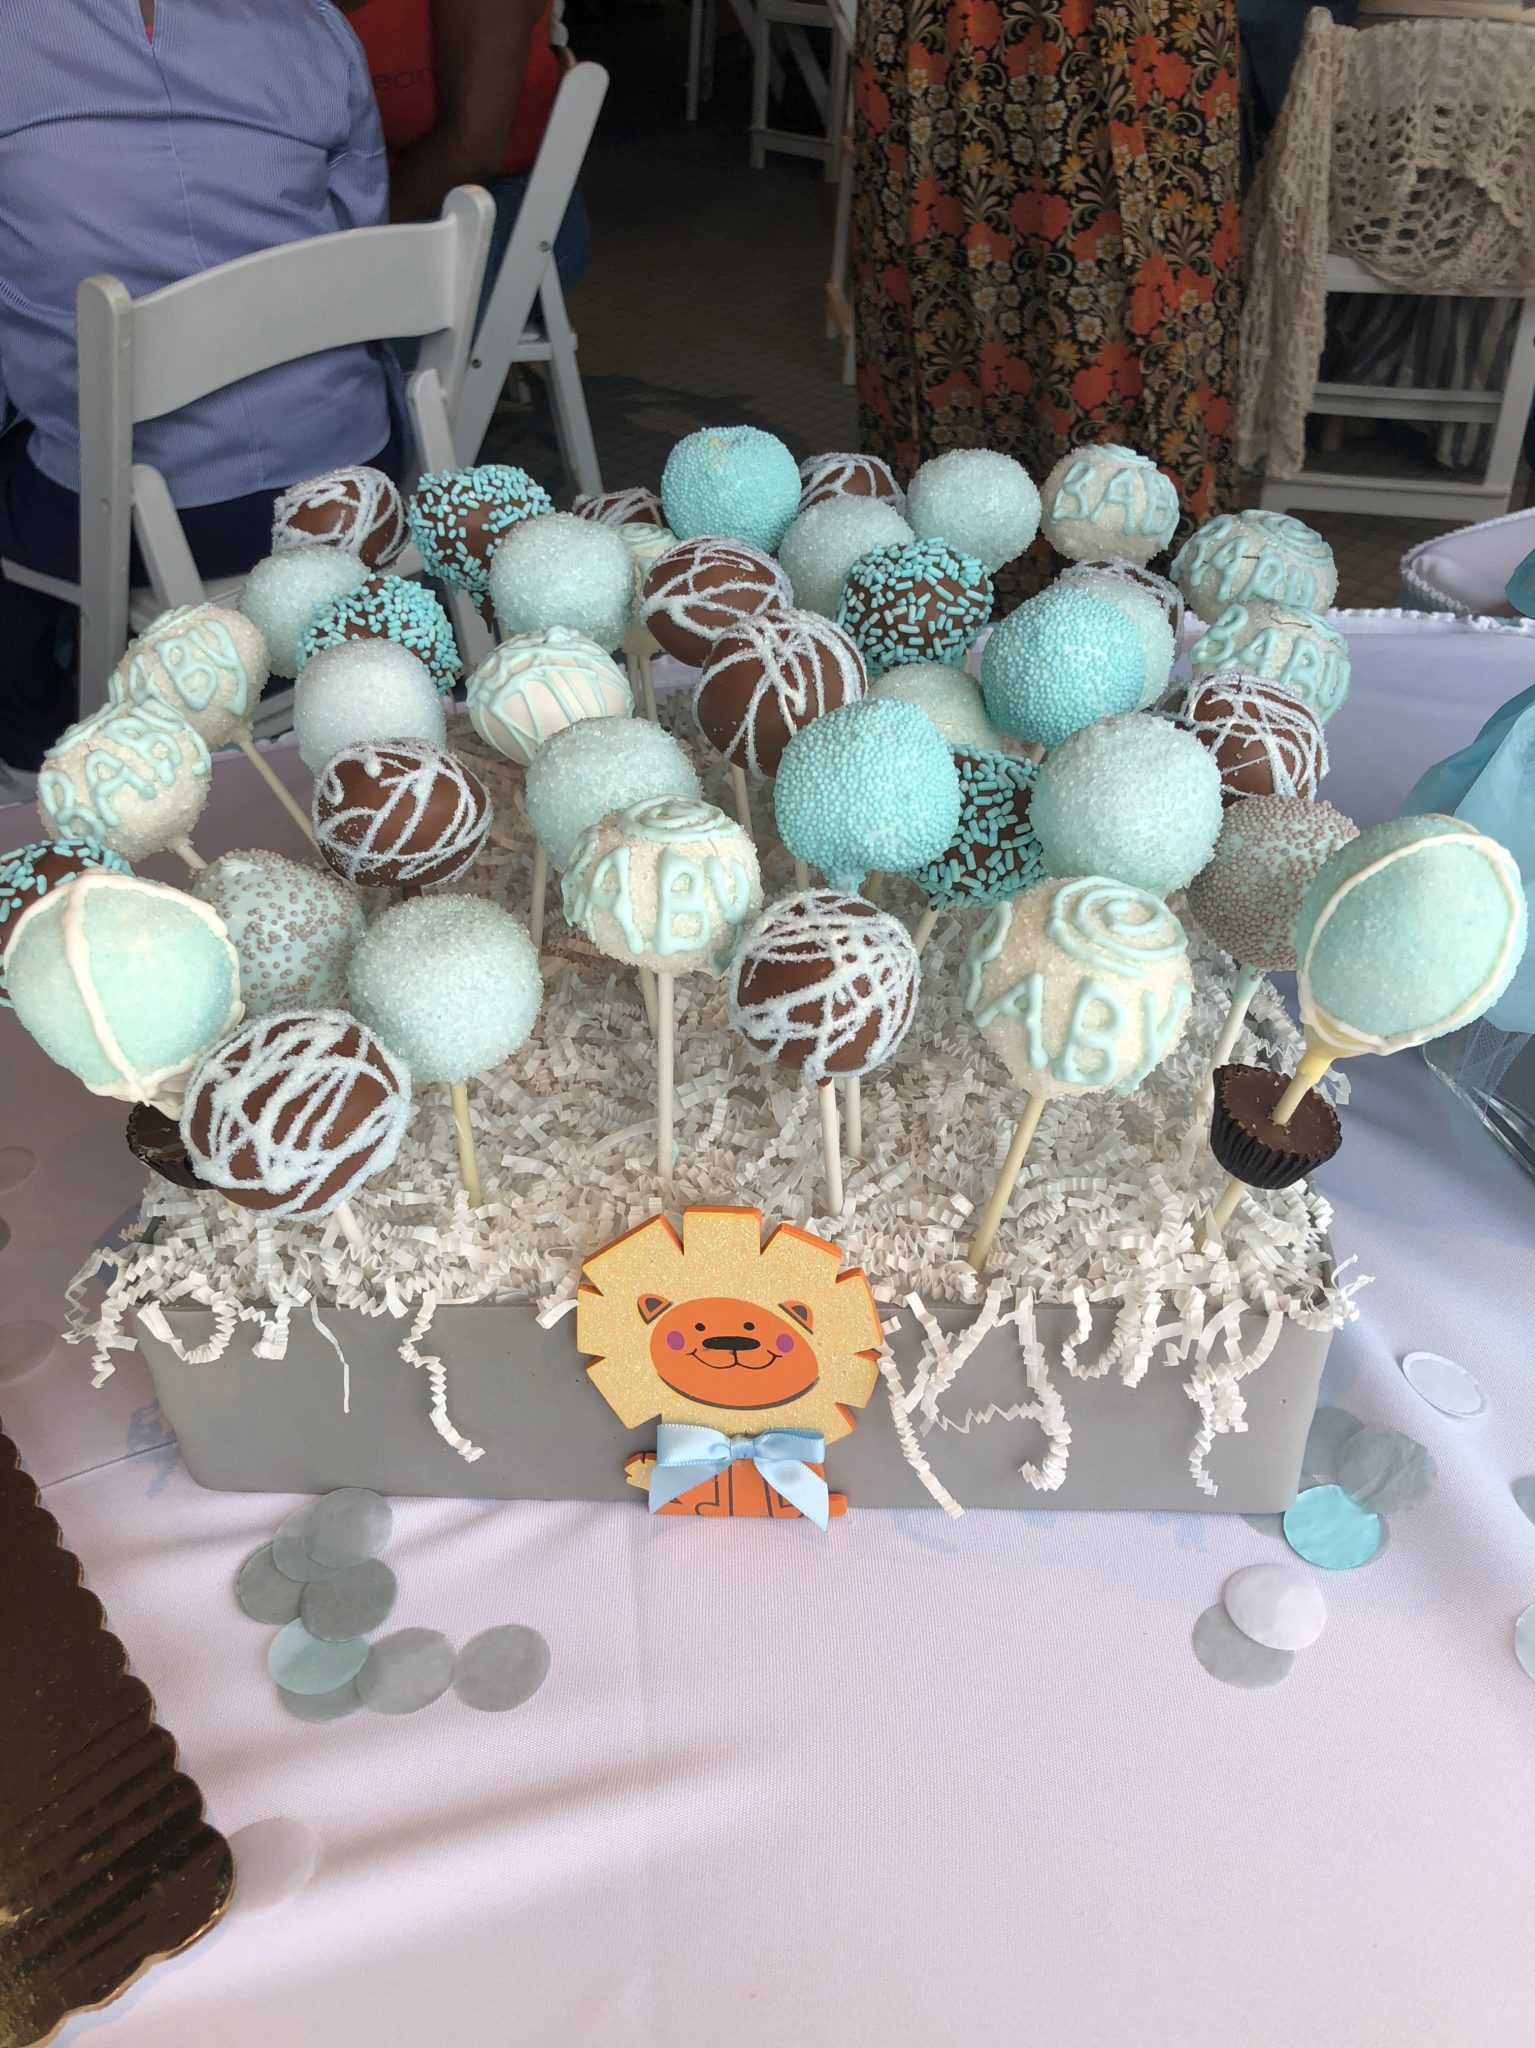 A custom display of assorted blue chocolate cake pops for a baby shower.